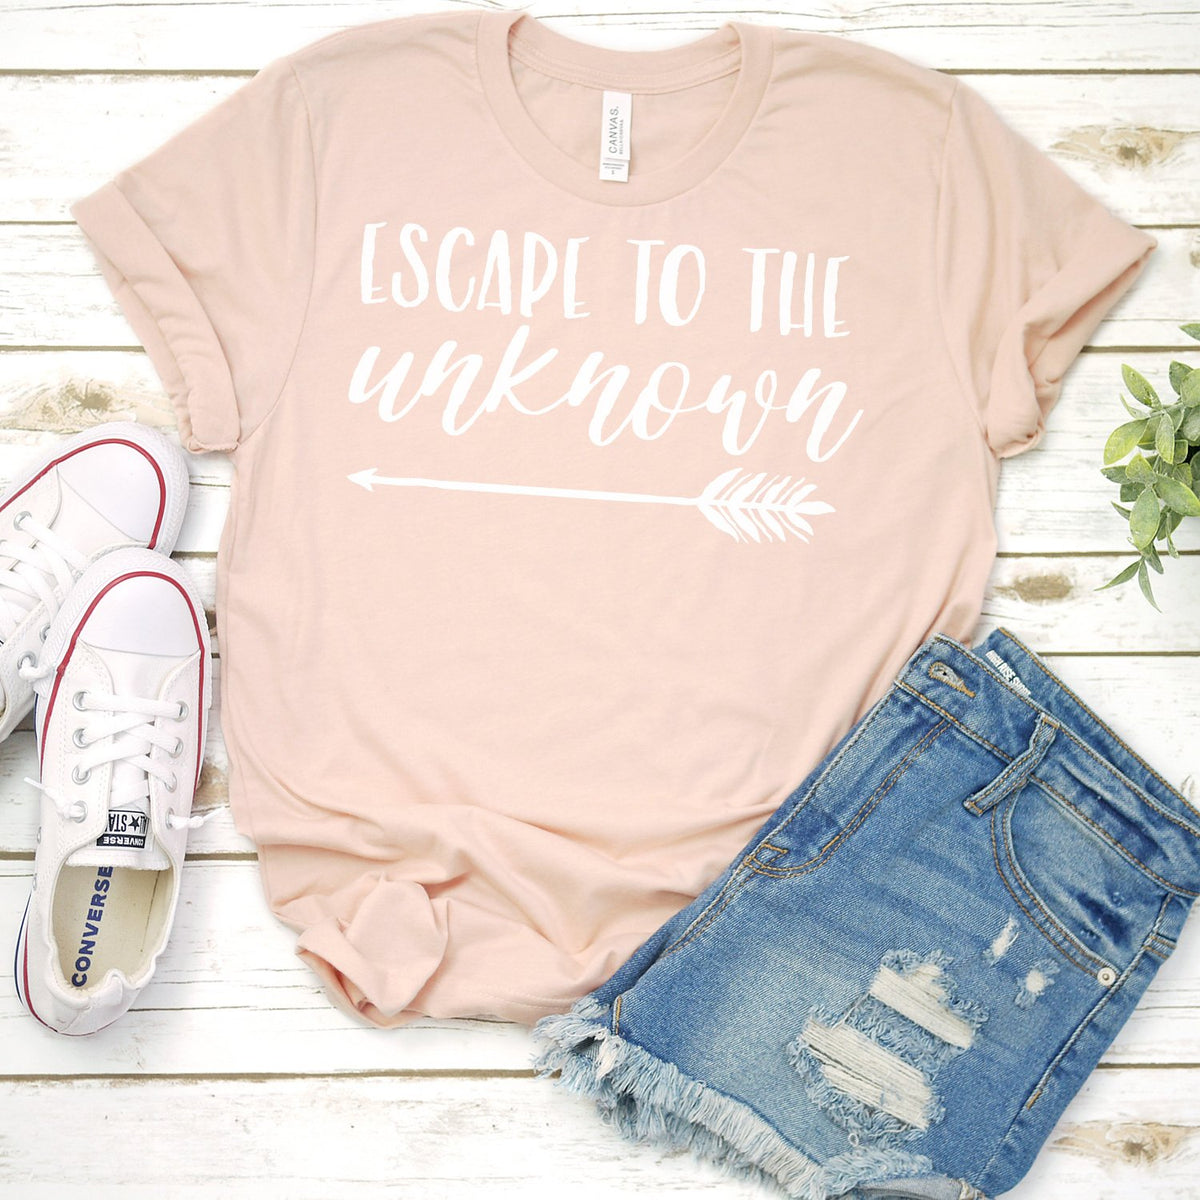 Escape to The Unknown - Short Sleeve Tee Shirt